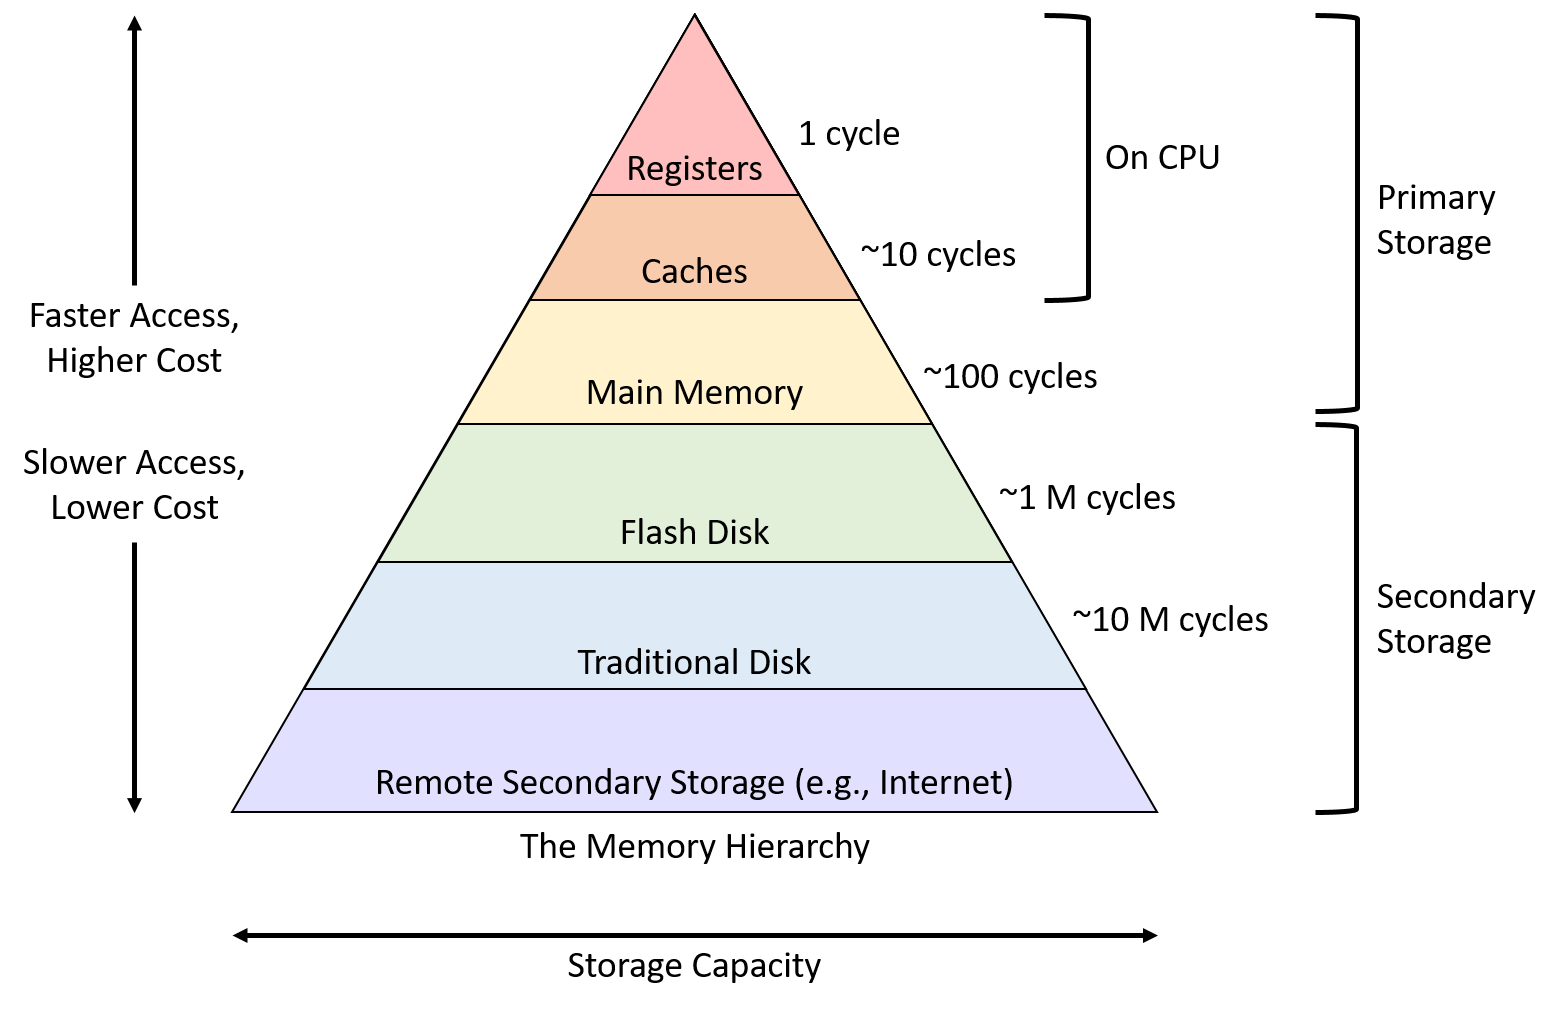 In order, from (high performance, high cost, low capacity) to (low performance, low cost, high capacity): registers, cache, main memory, flash disk, traditional disk, and remote secondary storage.